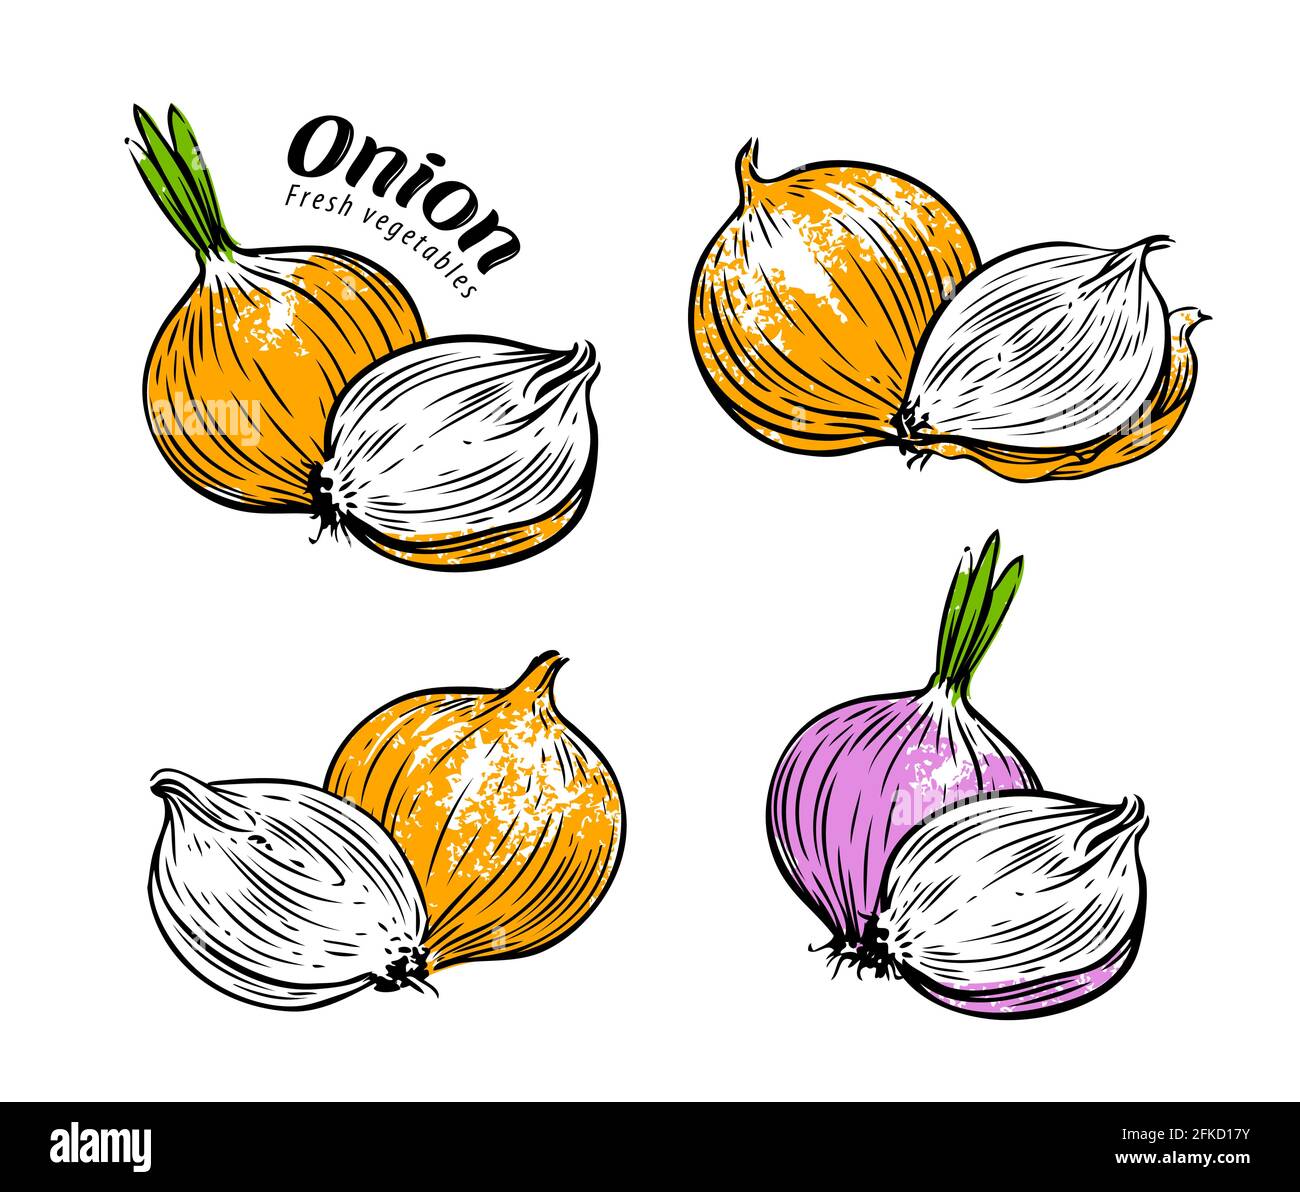 Vegetables set. Whole onion and cross section. Vector illustration isolated on white Stock Vector